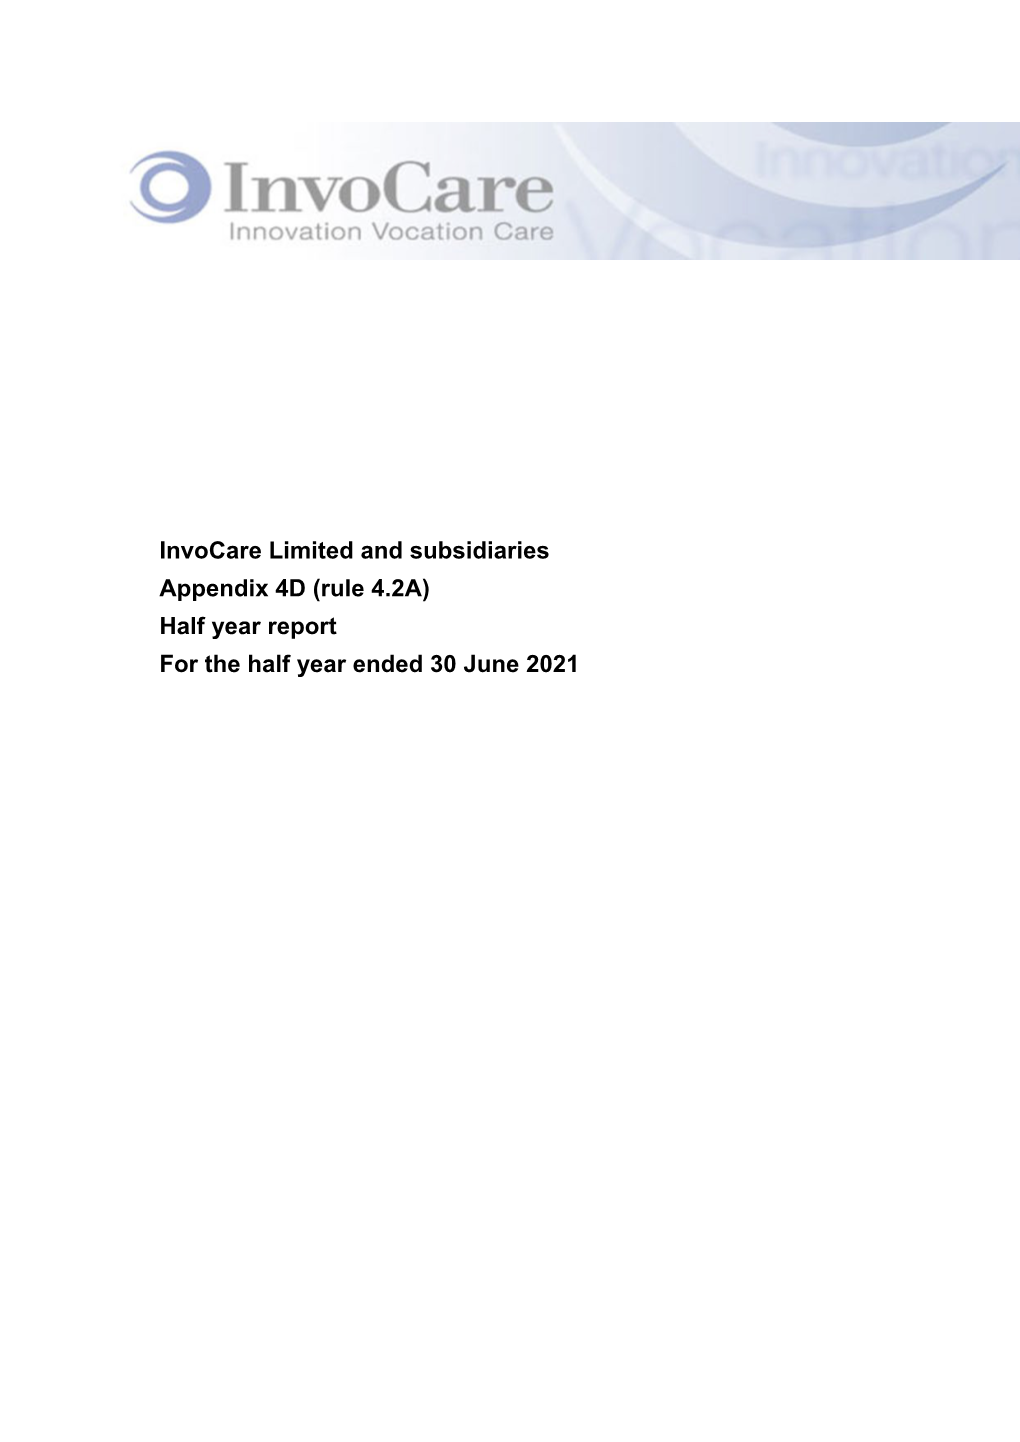 Invocare Limited and Subsidiaries Appendix 4D (Rule 4.2A) Half Year Report for the Half Year Ended 30 June 2021